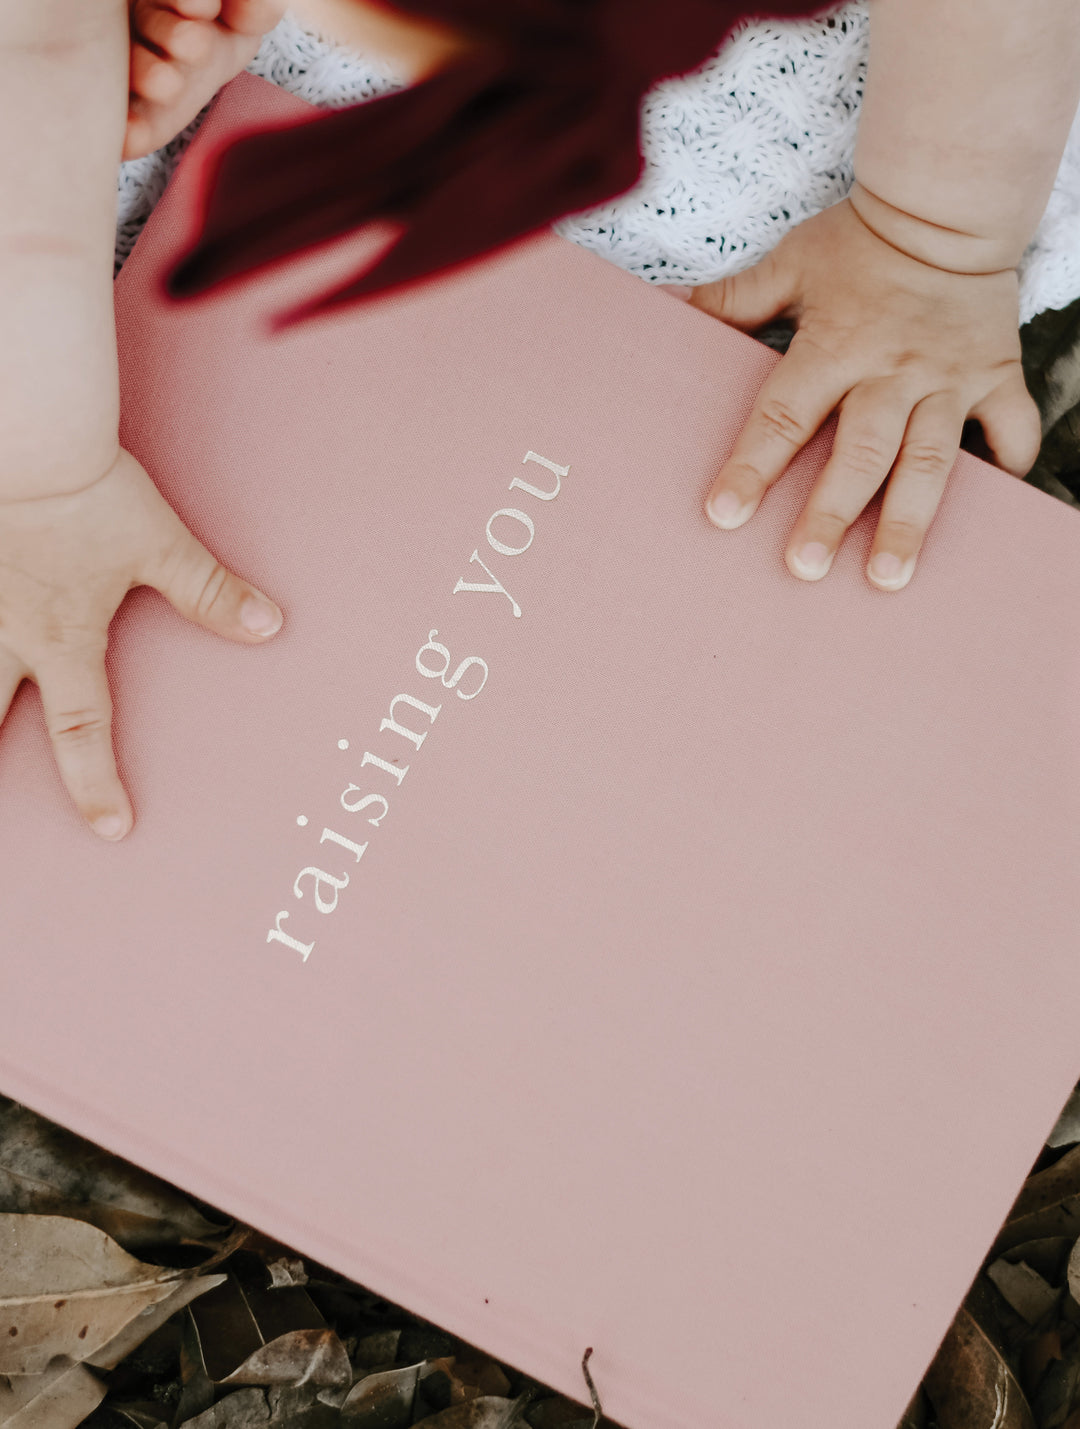 Write To Me - Raising You | Letters To My Baby (Pink)